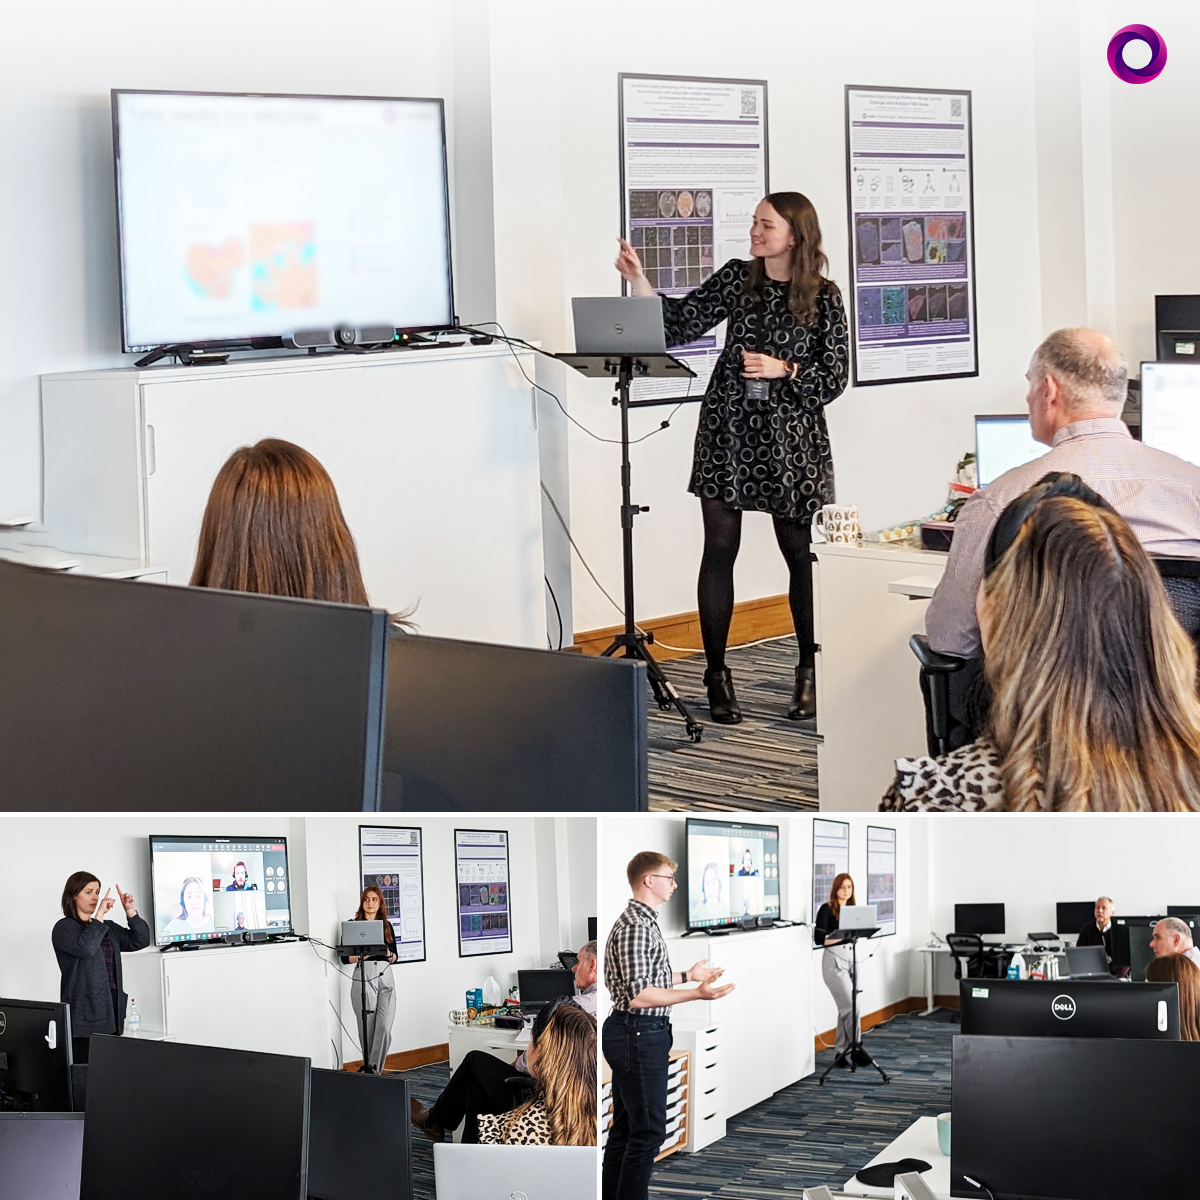 At our latest group meeting, #ImageAnalysis Scientist Mairi MacRae presented key findings and learnings from a recent repeat client study using area quantification, which included:

🔸 How differences in staining intensity between follow-up studies affect the development of…